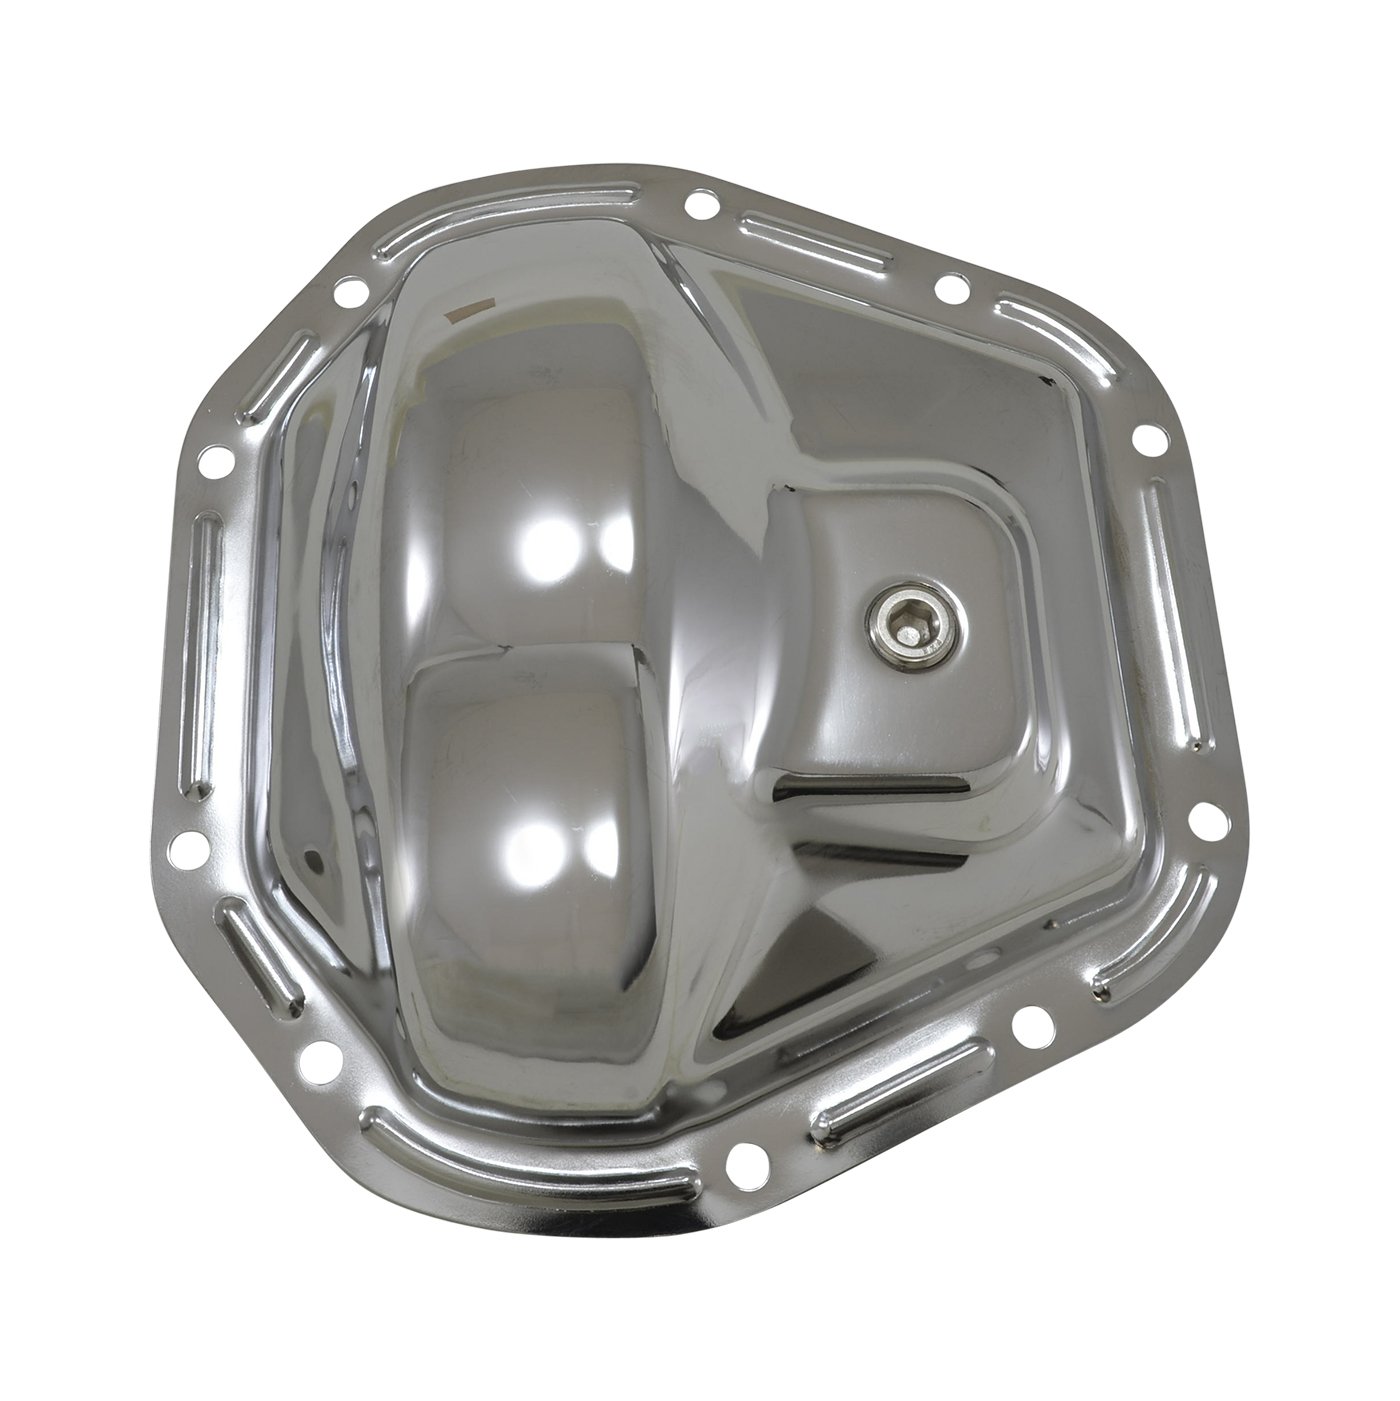 Differential Cover Fits Dana 60 and 61 Standard Rotation